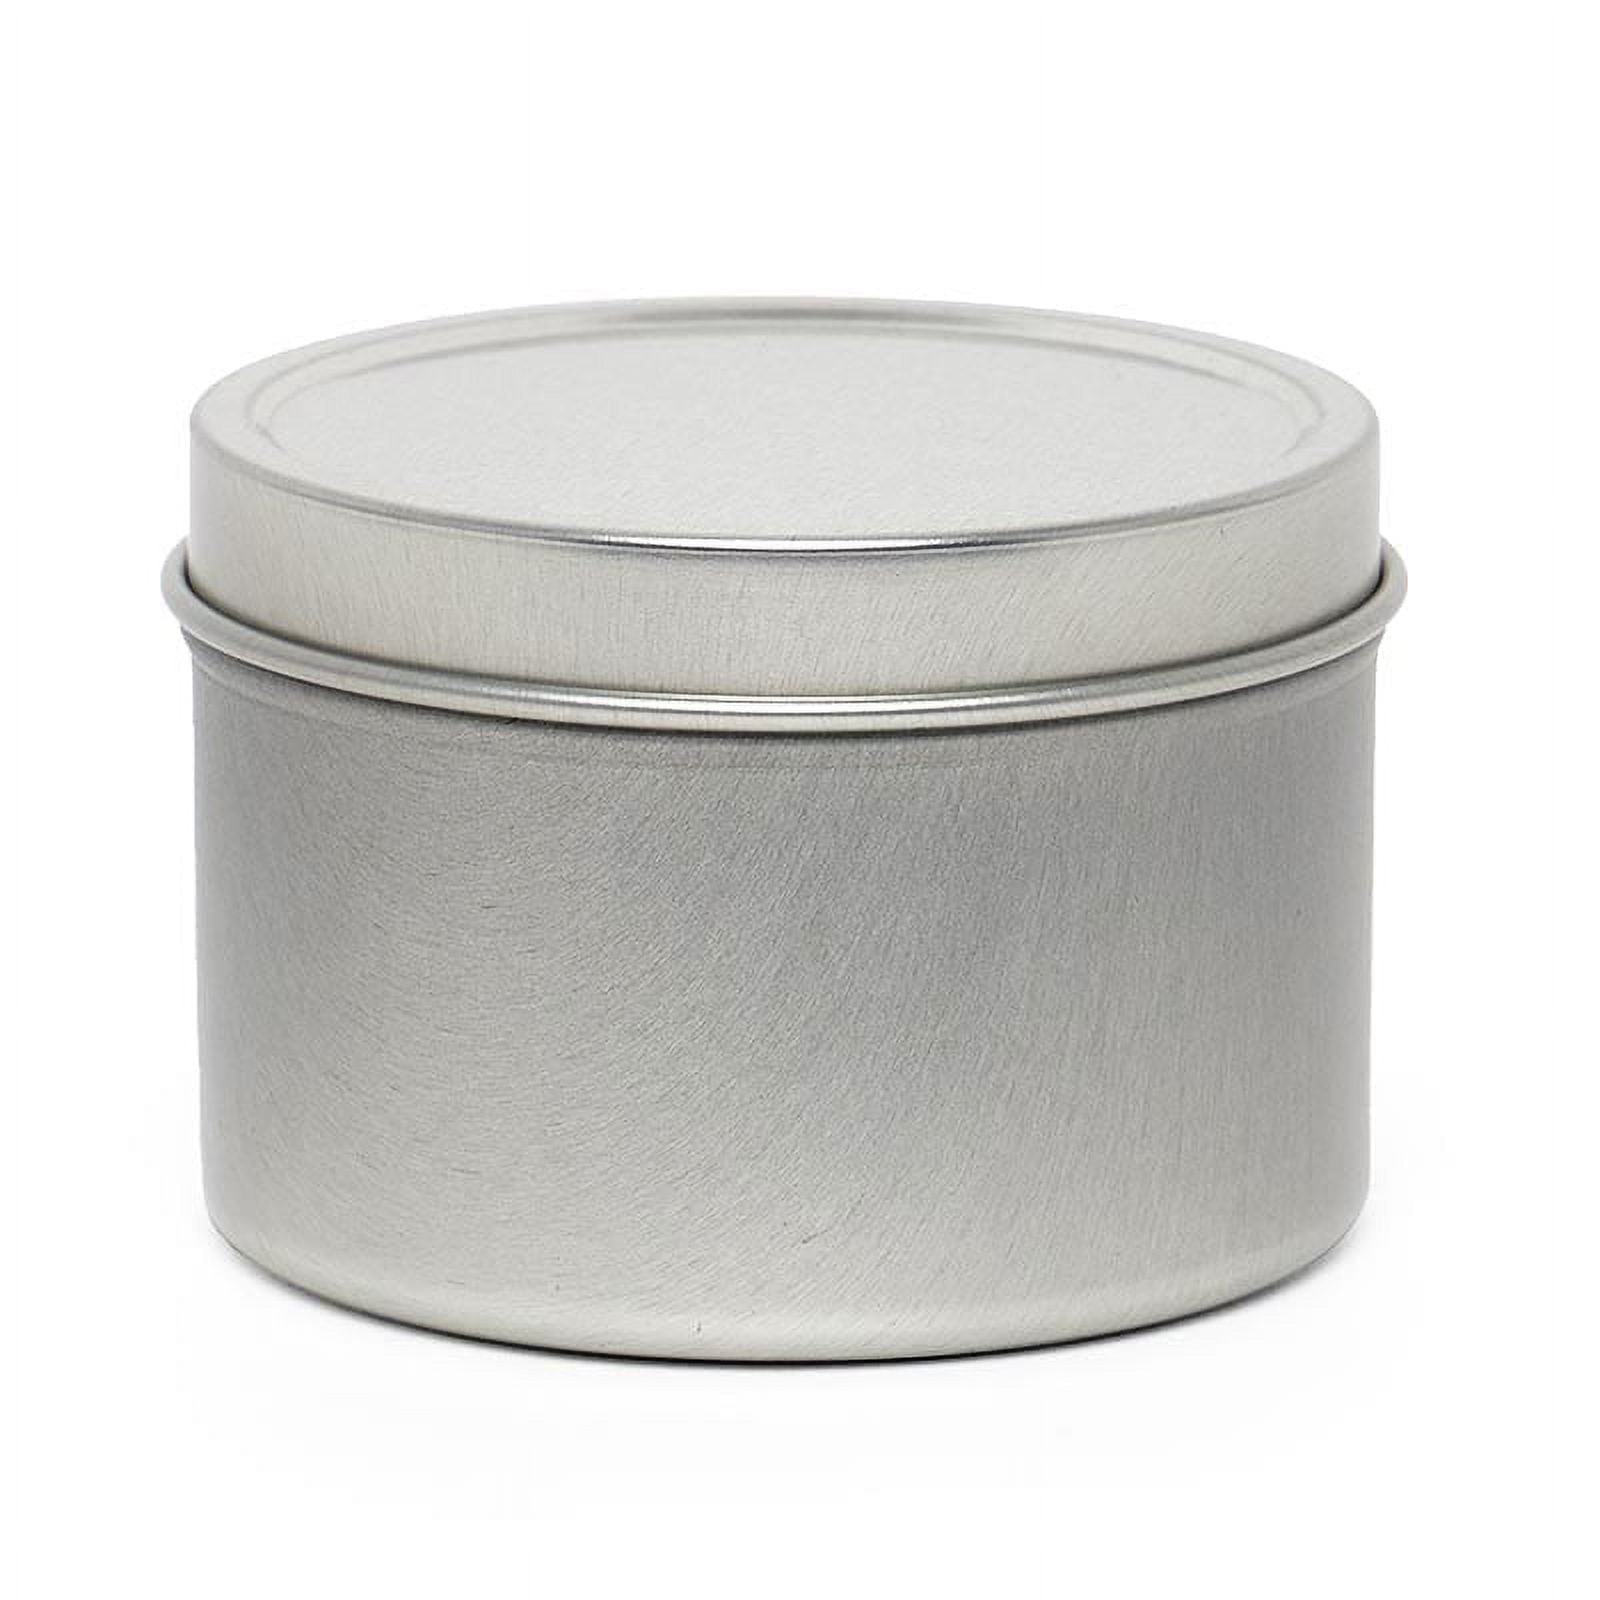 24 Pack Candle Tins 8 oz with Lids, Bulk Empty Candle Jars for Making  Candles, Premium Metal Candle Containers, Round Candle - AliExpress